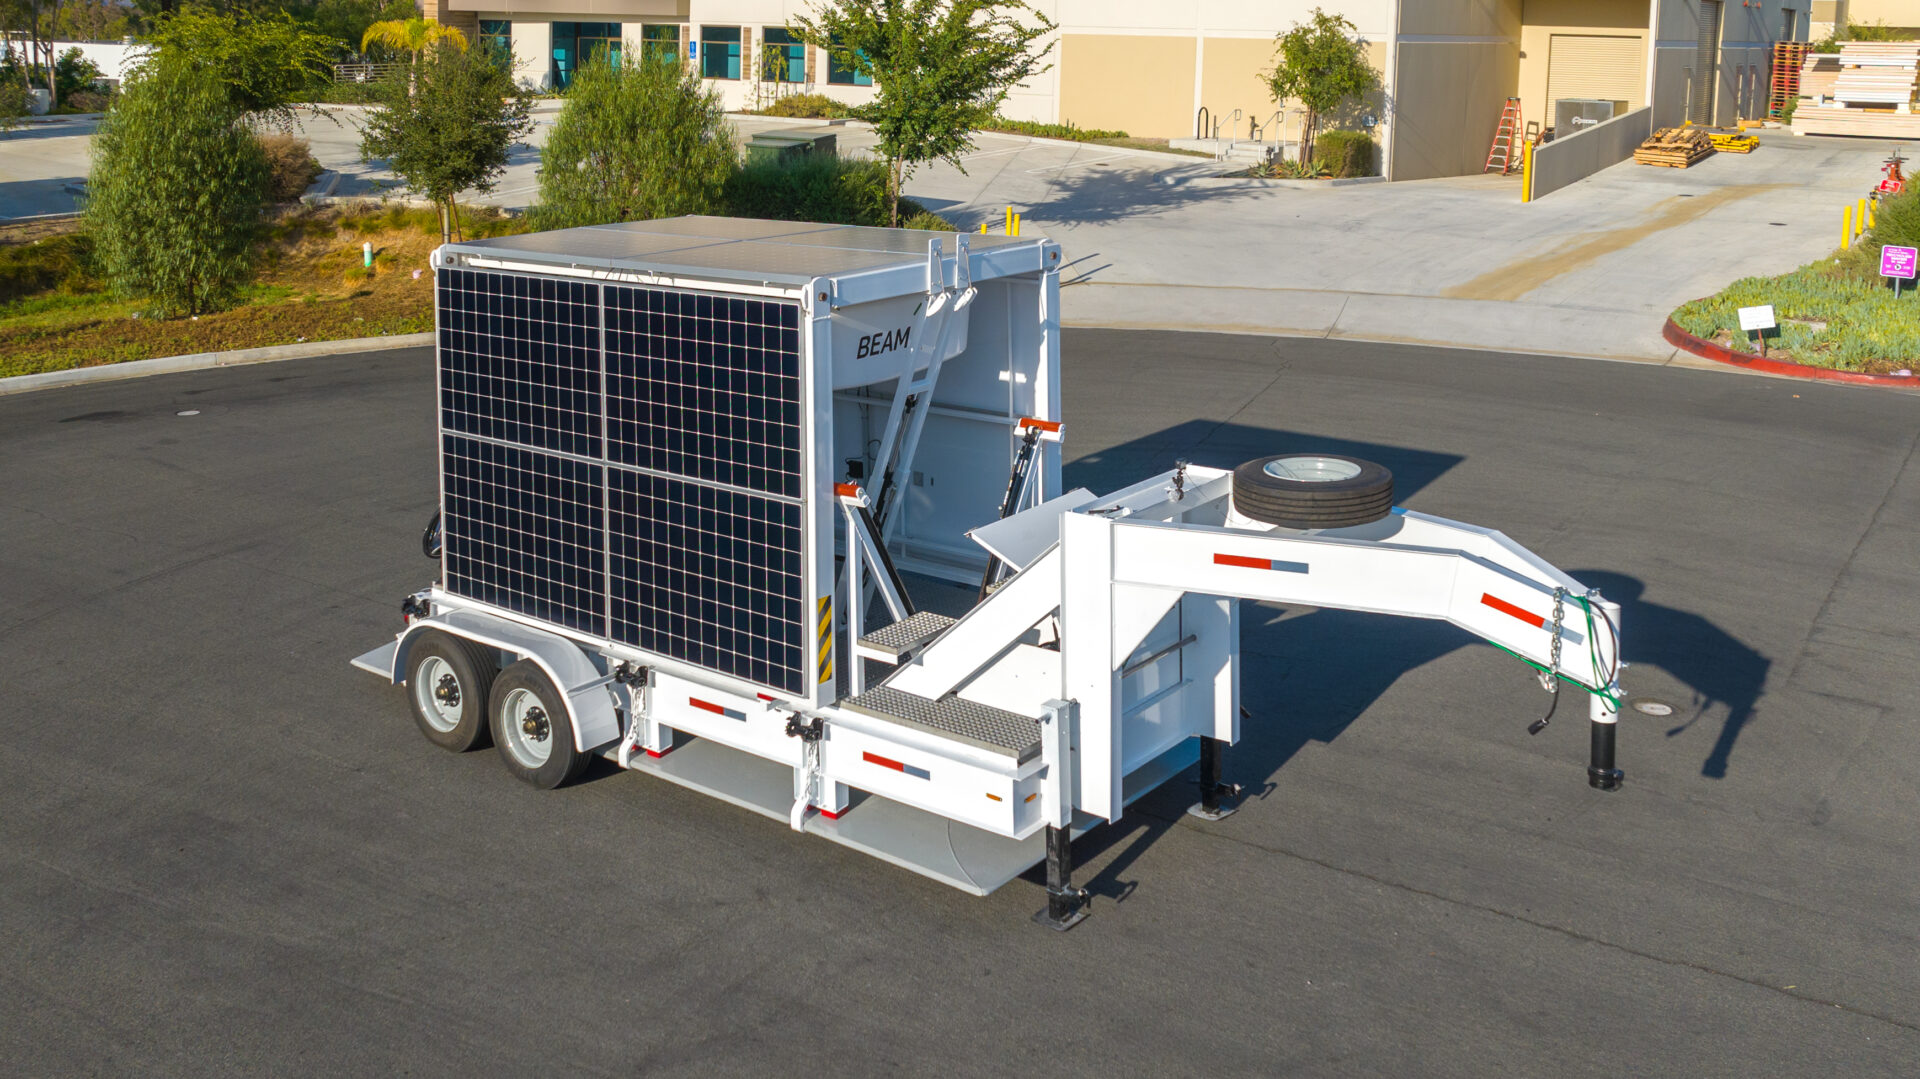 Beam ARC Mobility™ trailer is specialized hydraulic transport equipment designed to rapidly relocate off-grid EV ARC™ 2020 sustainable EV charging systems.